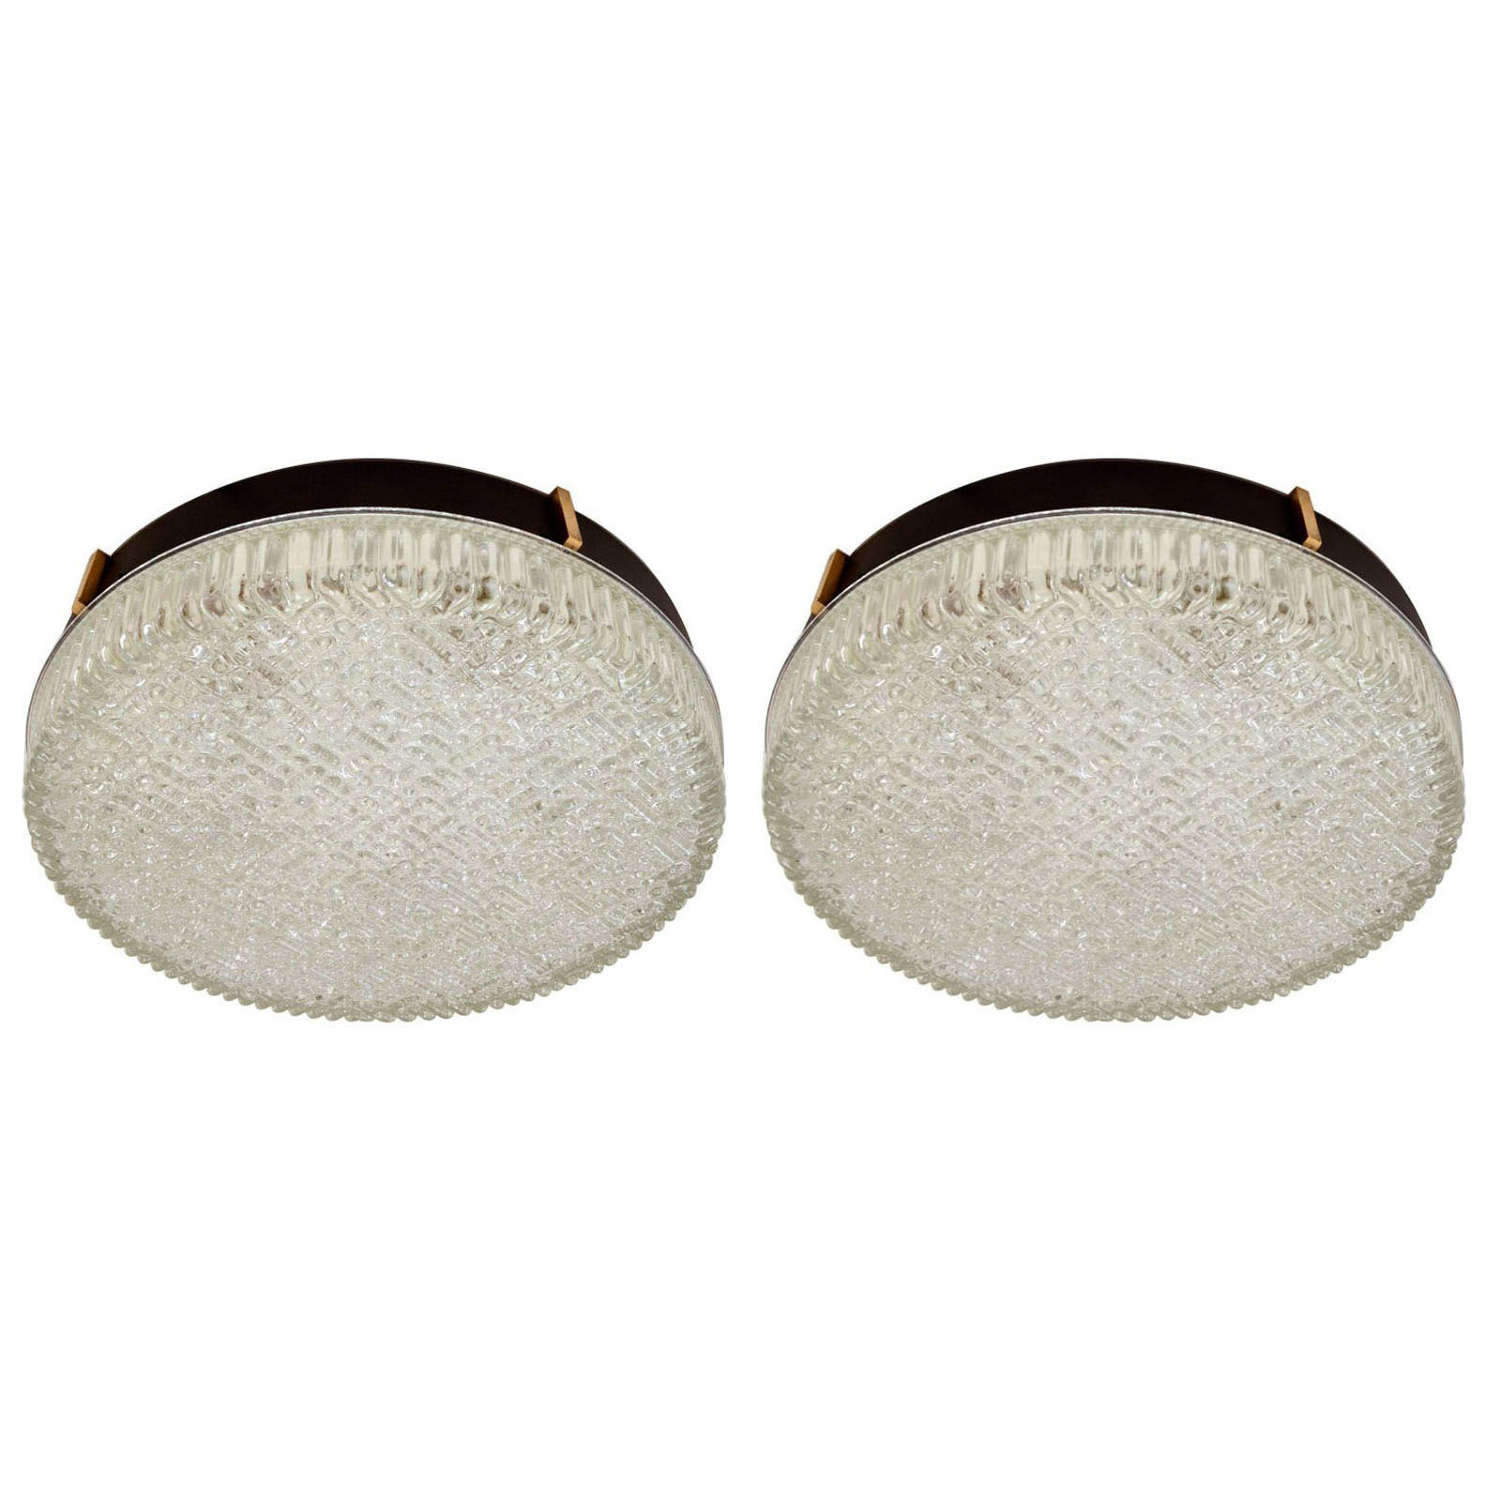 Pair of Large Flush Mount Glass Pendant or Wall Lights